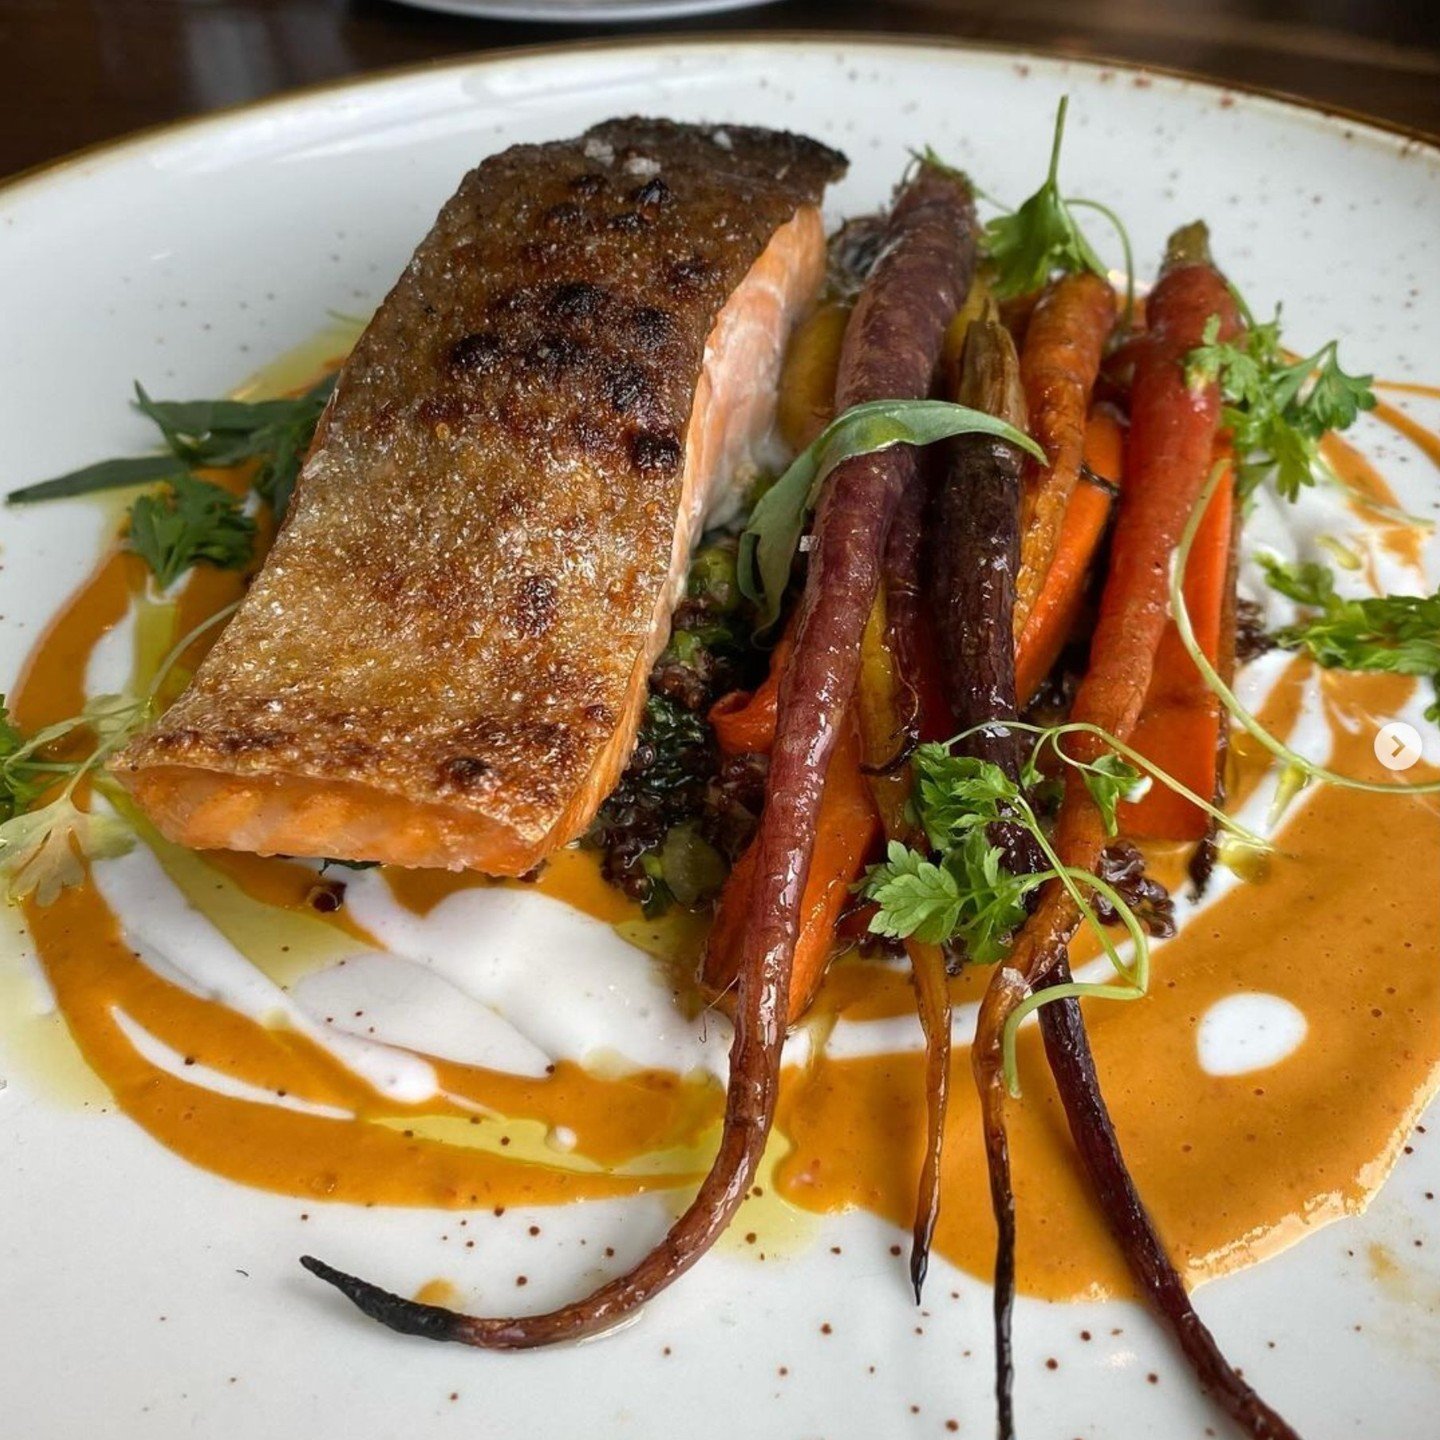 If you're looking for something sweet, spicy, smokey and springy, check out this dish by Chef Marc Sheehan at Northern Spy in Canton: Loch Duart Salmon, grilled over an oak-fueled hearth, with cider roasted rainbow carrots, baked quinoa and pea green